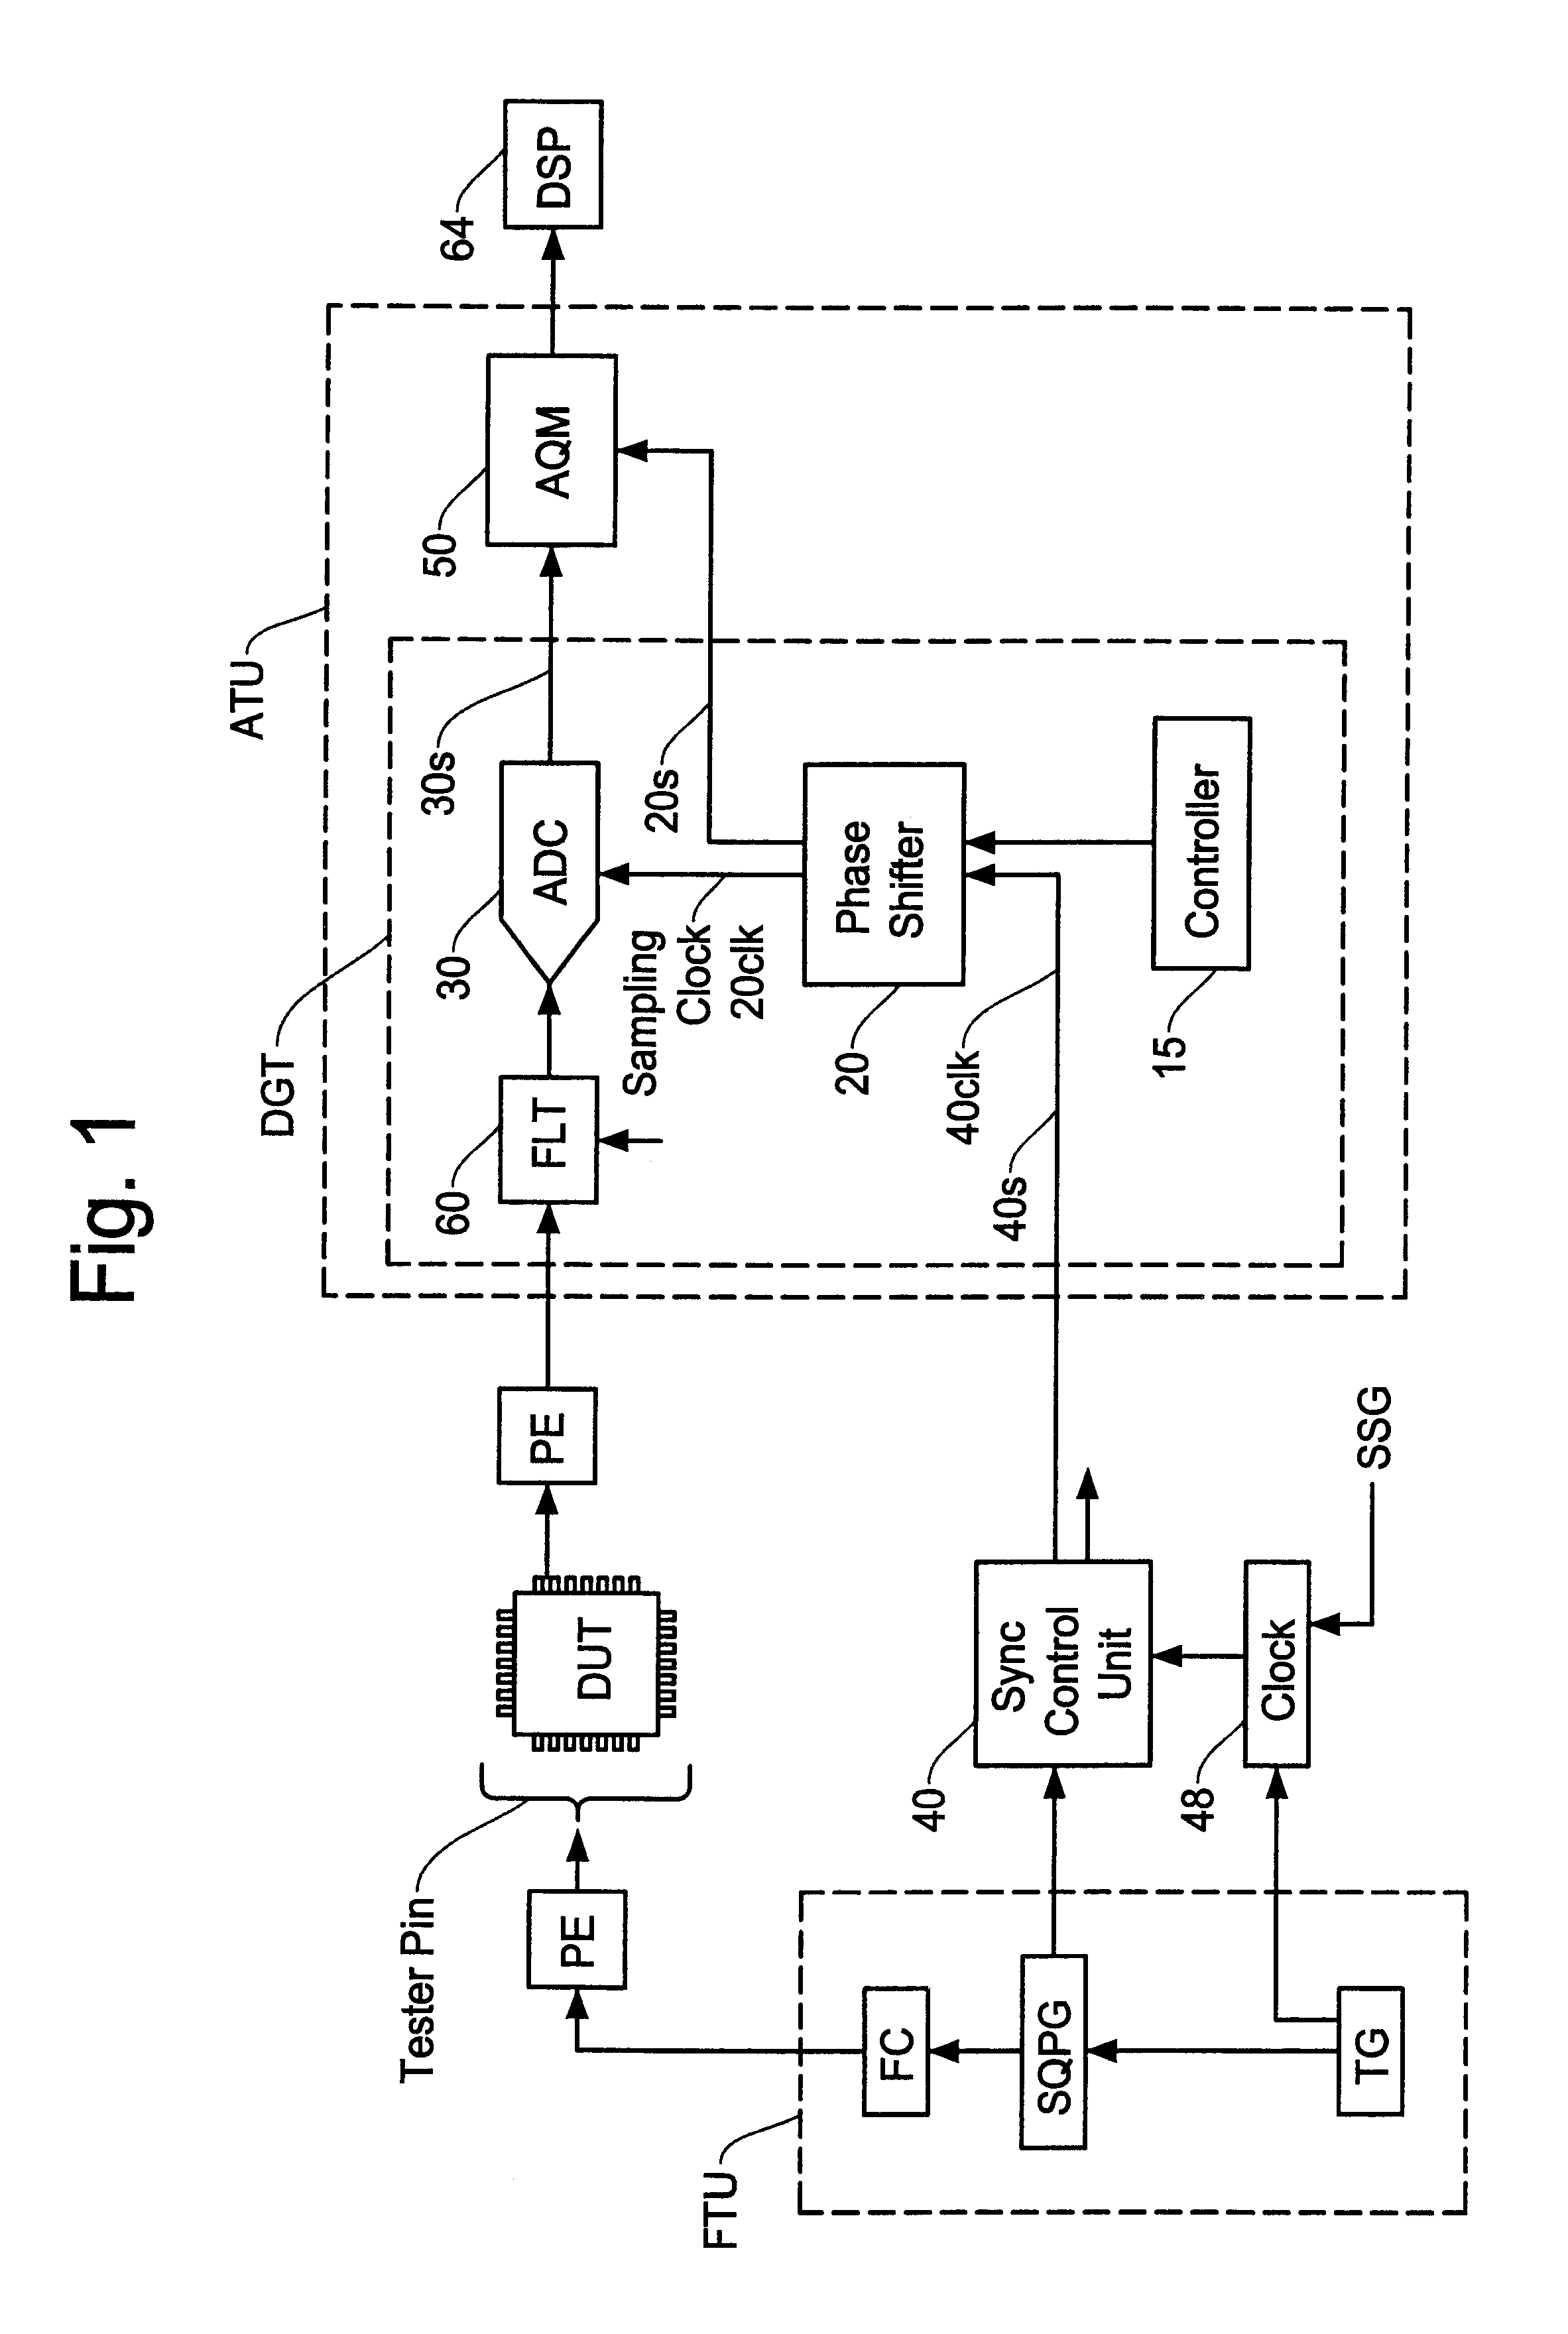 Semiconductor test system